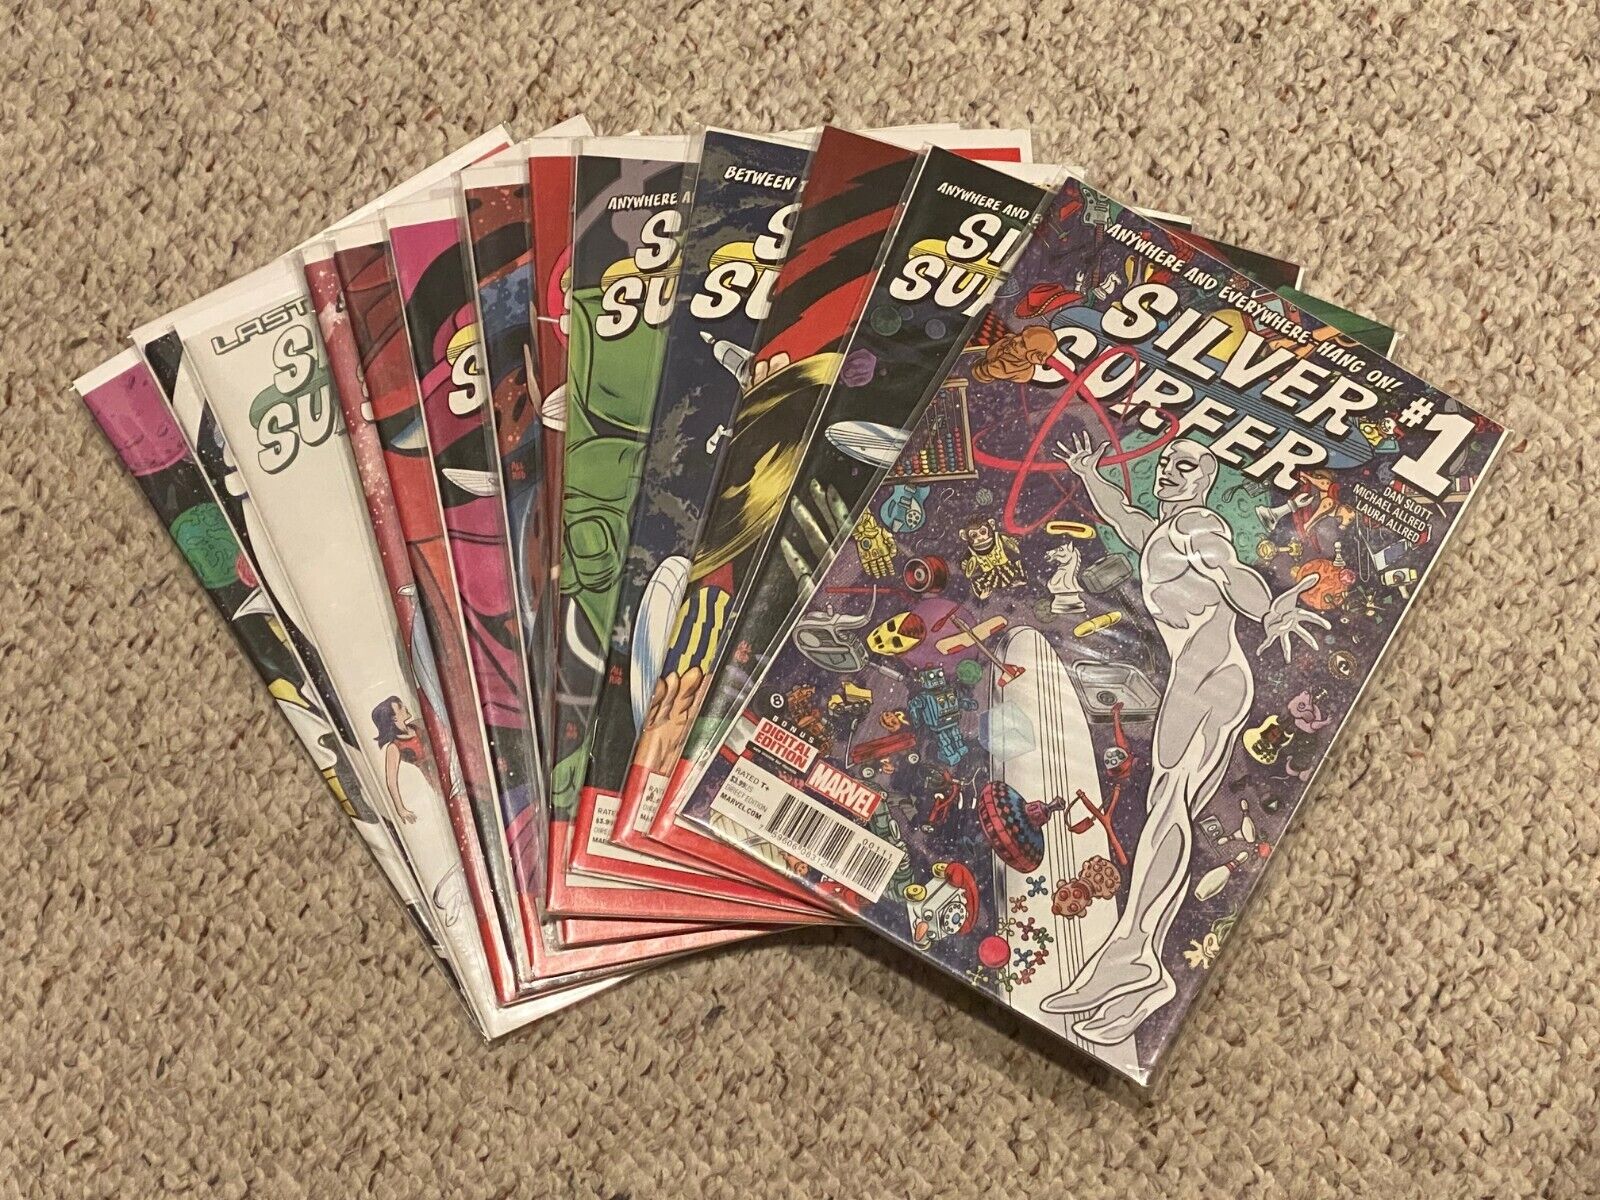 SILVER SURFER ISSUES #1-15 BY MICHAEL ALLRED